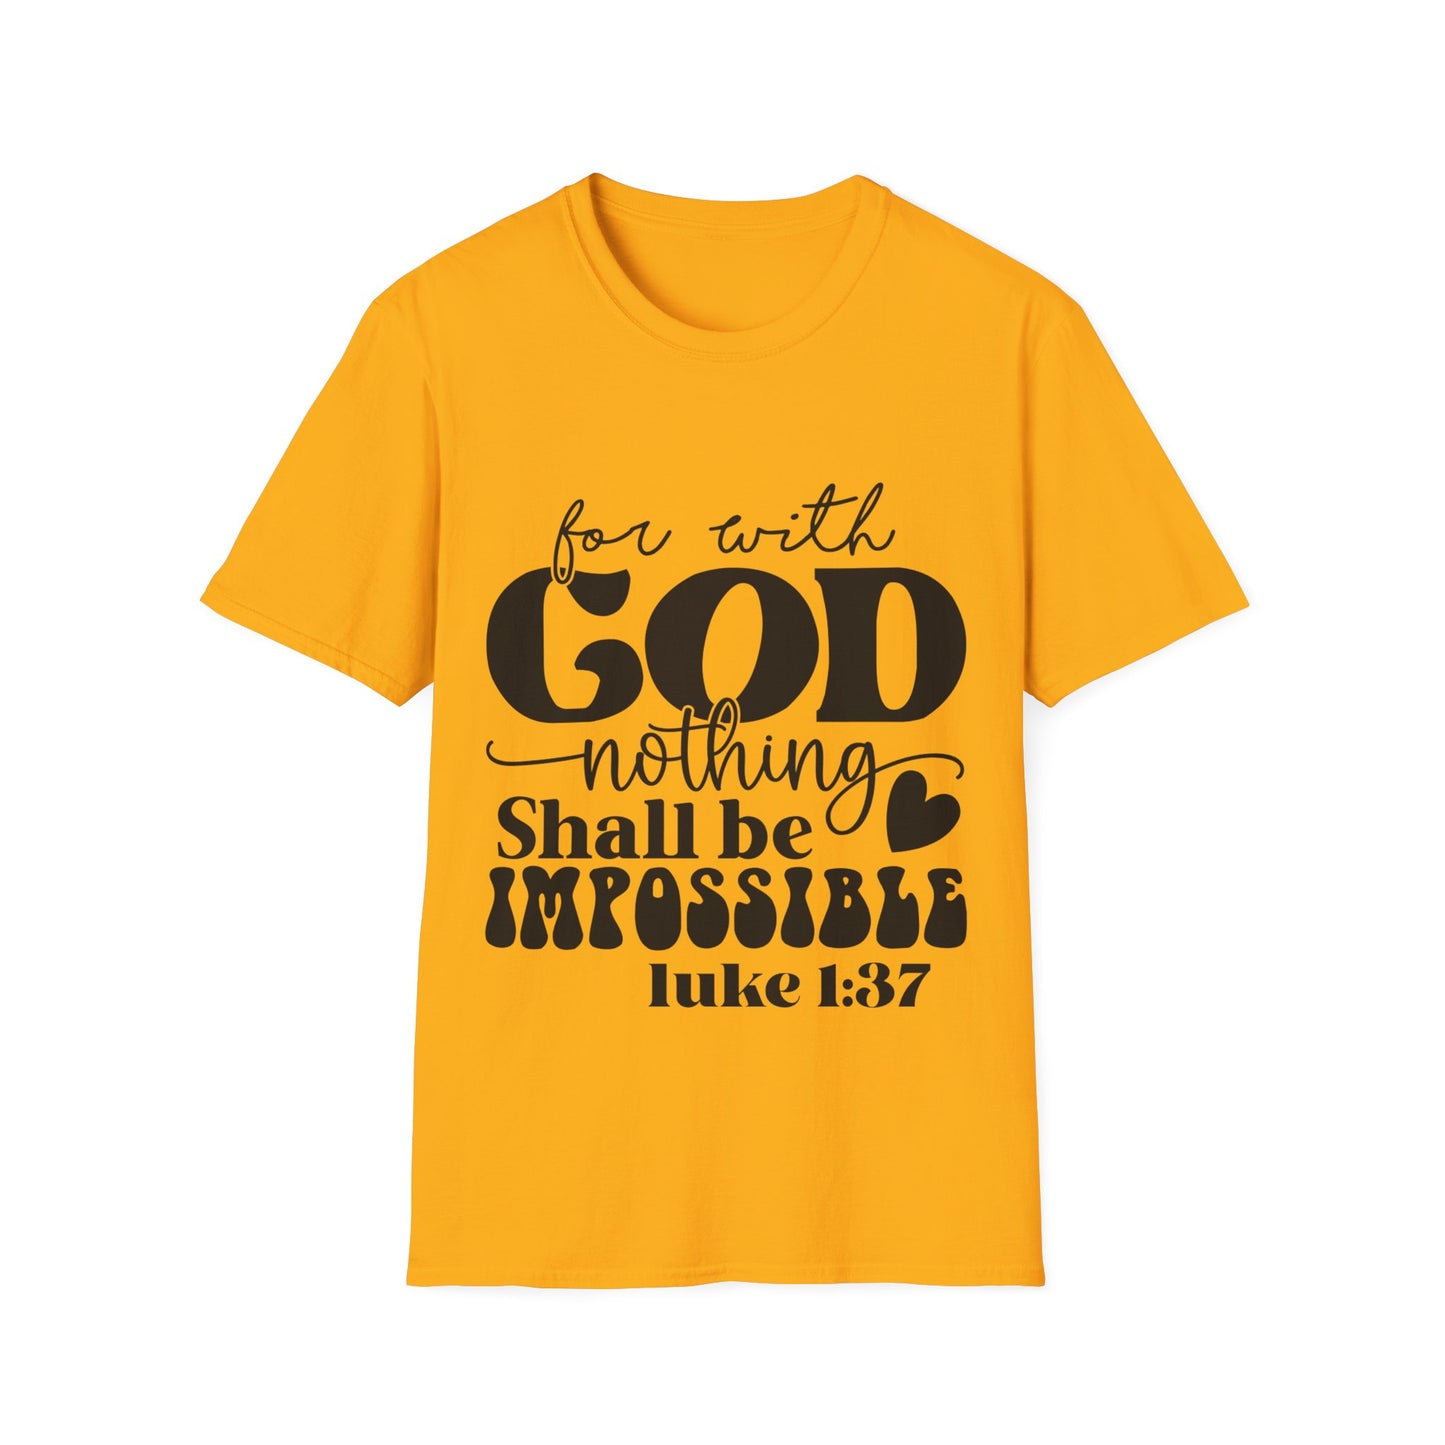 For With God Nothing Shall Be Impossible Luck 1:37 Triple Viking T-Shirt